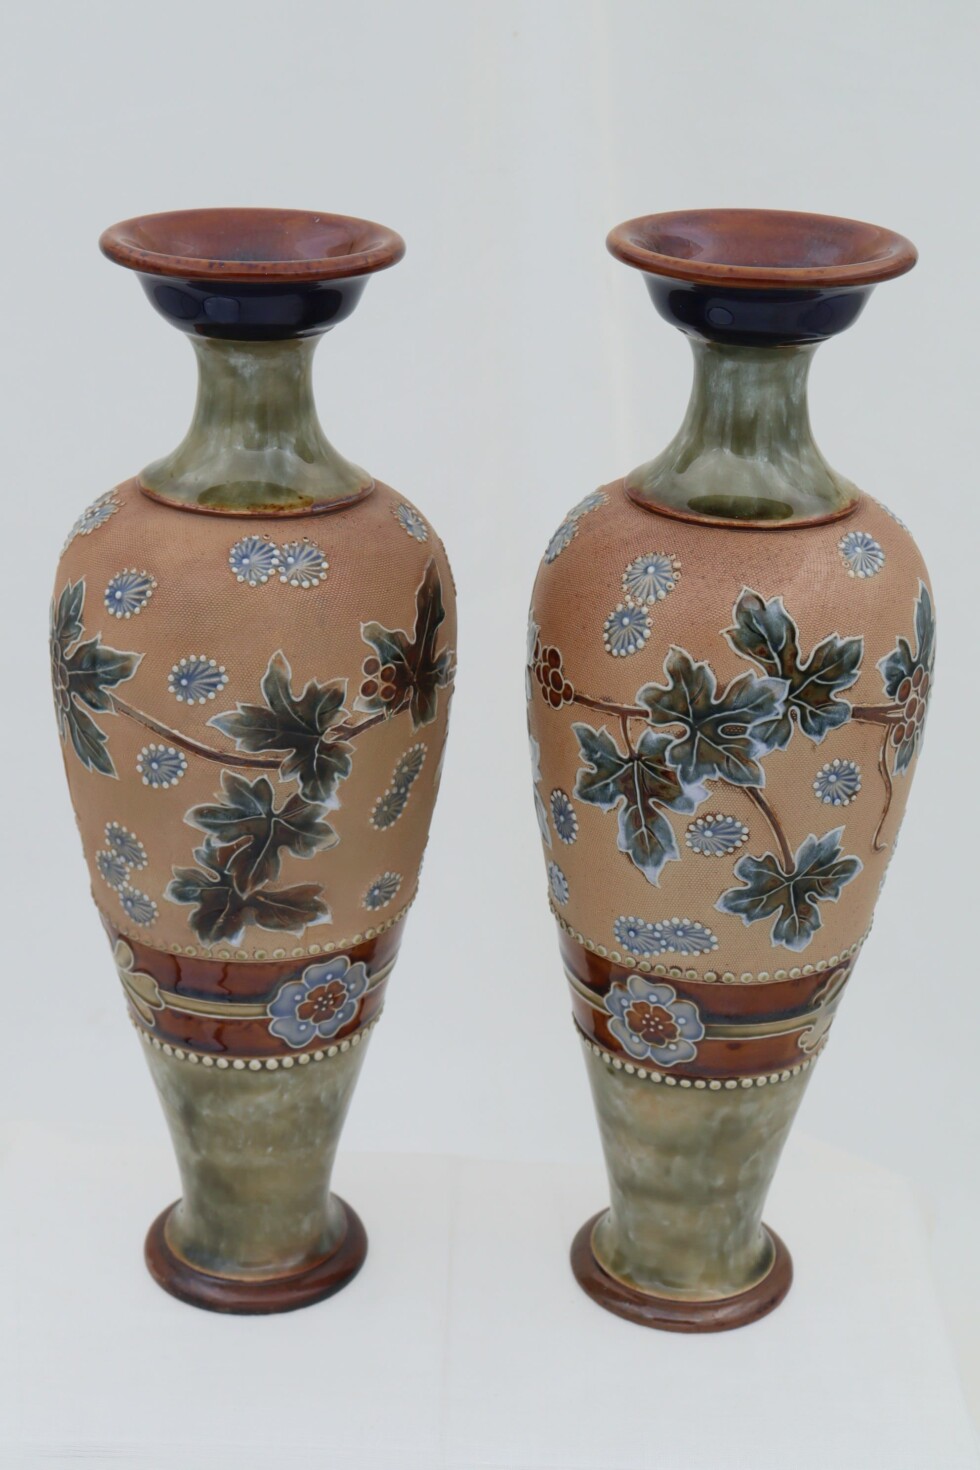 Pair of Royal Doulton Chine Ware vases